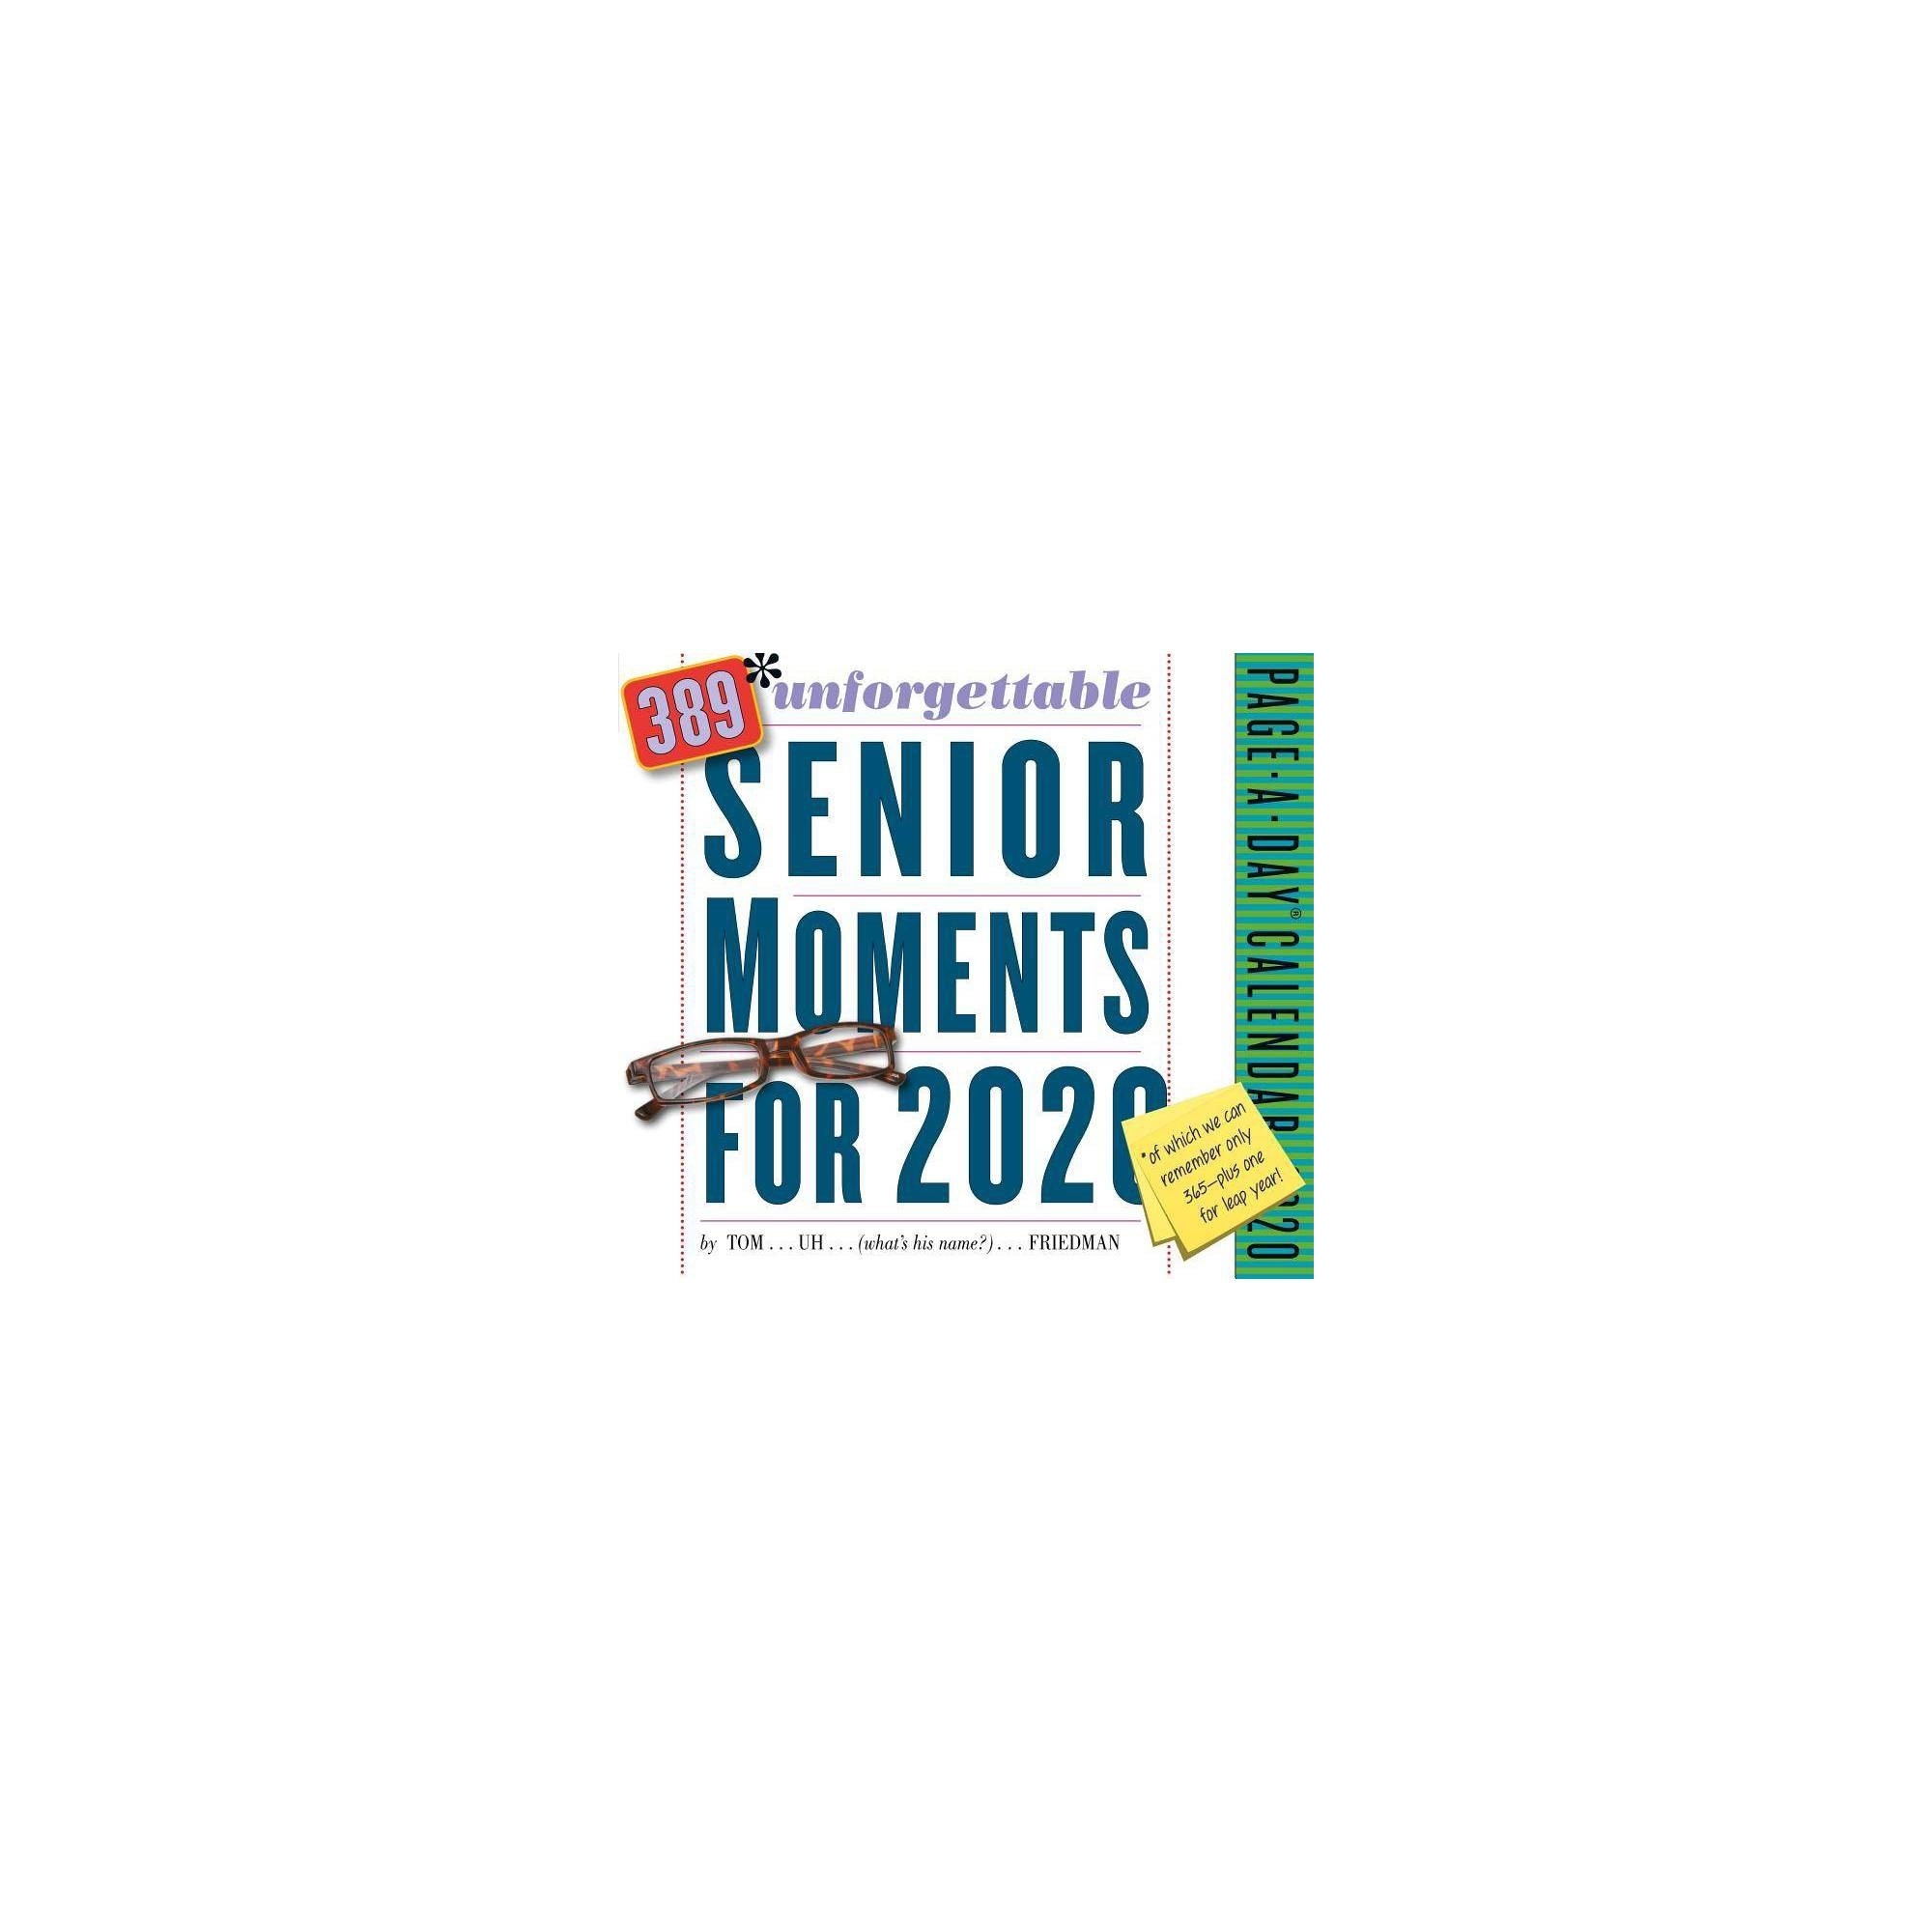 389* Unforgettable Senior Moments Page-A-Day Calendar 2020